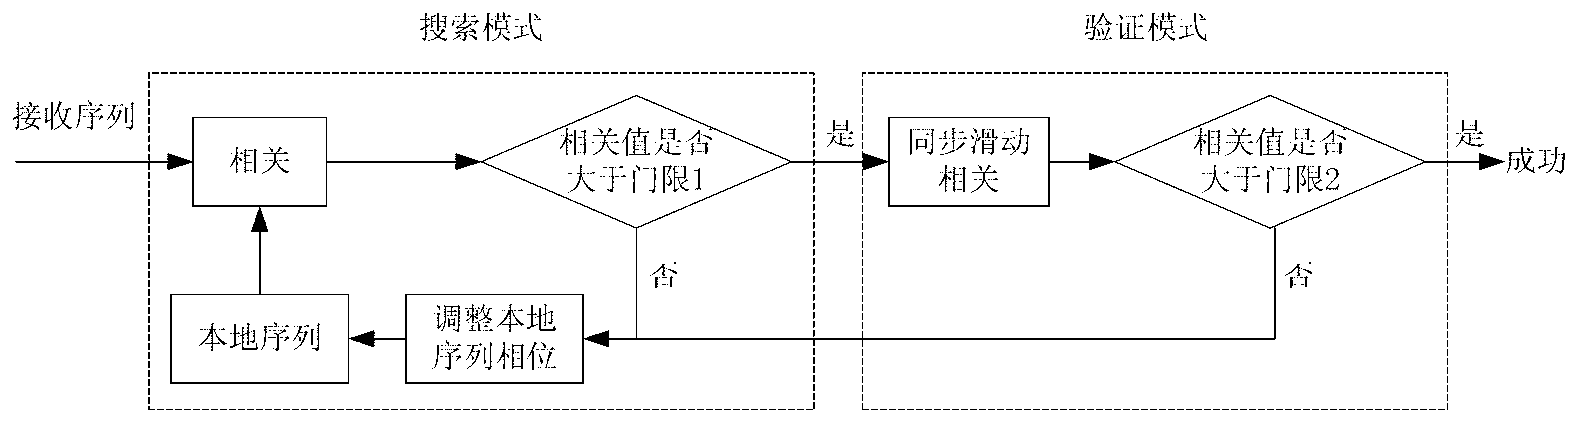 Fixed time acquiring method under continuous system multipath channel